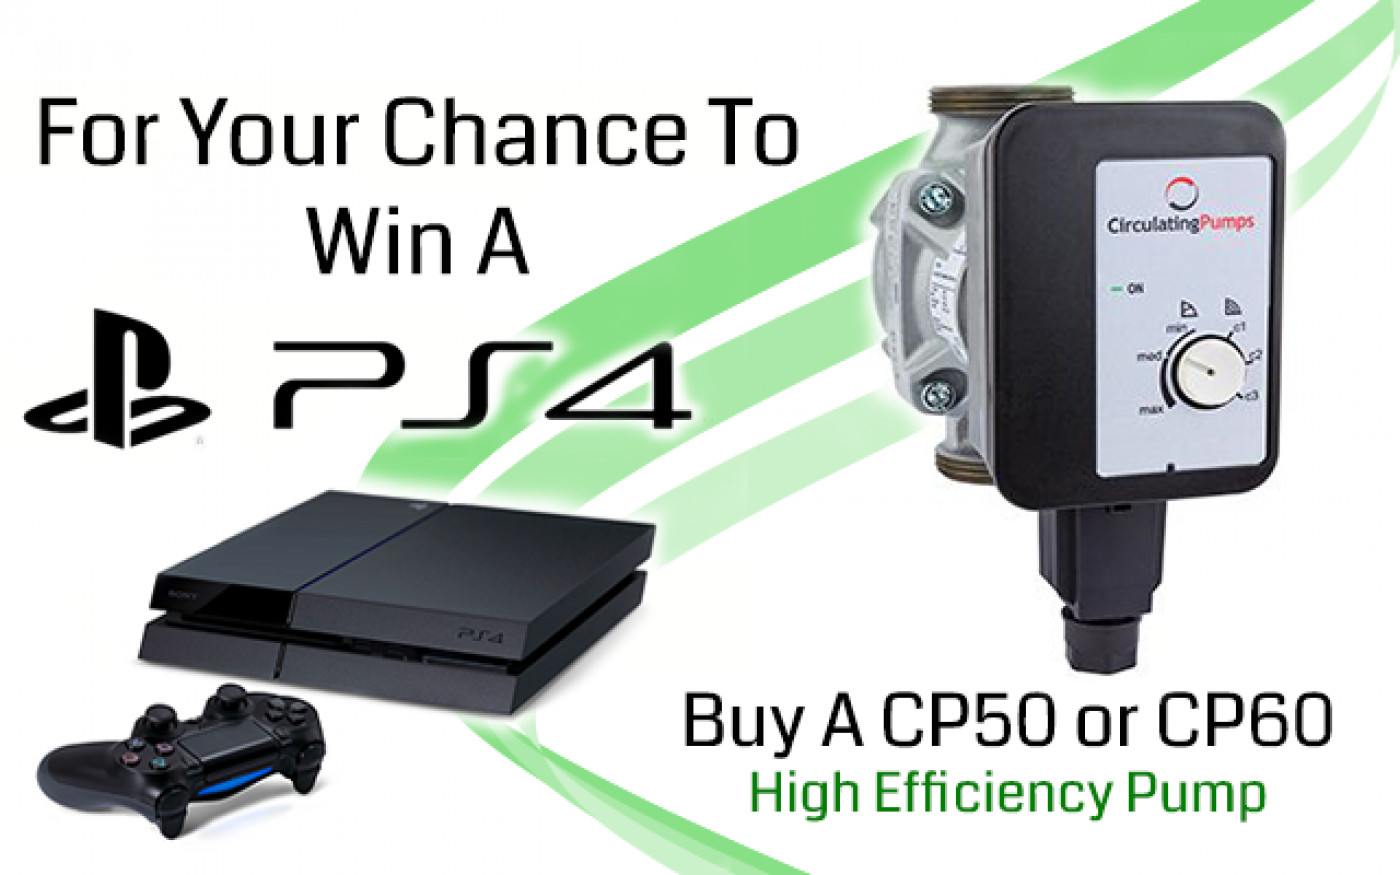 Win a Playstation 4